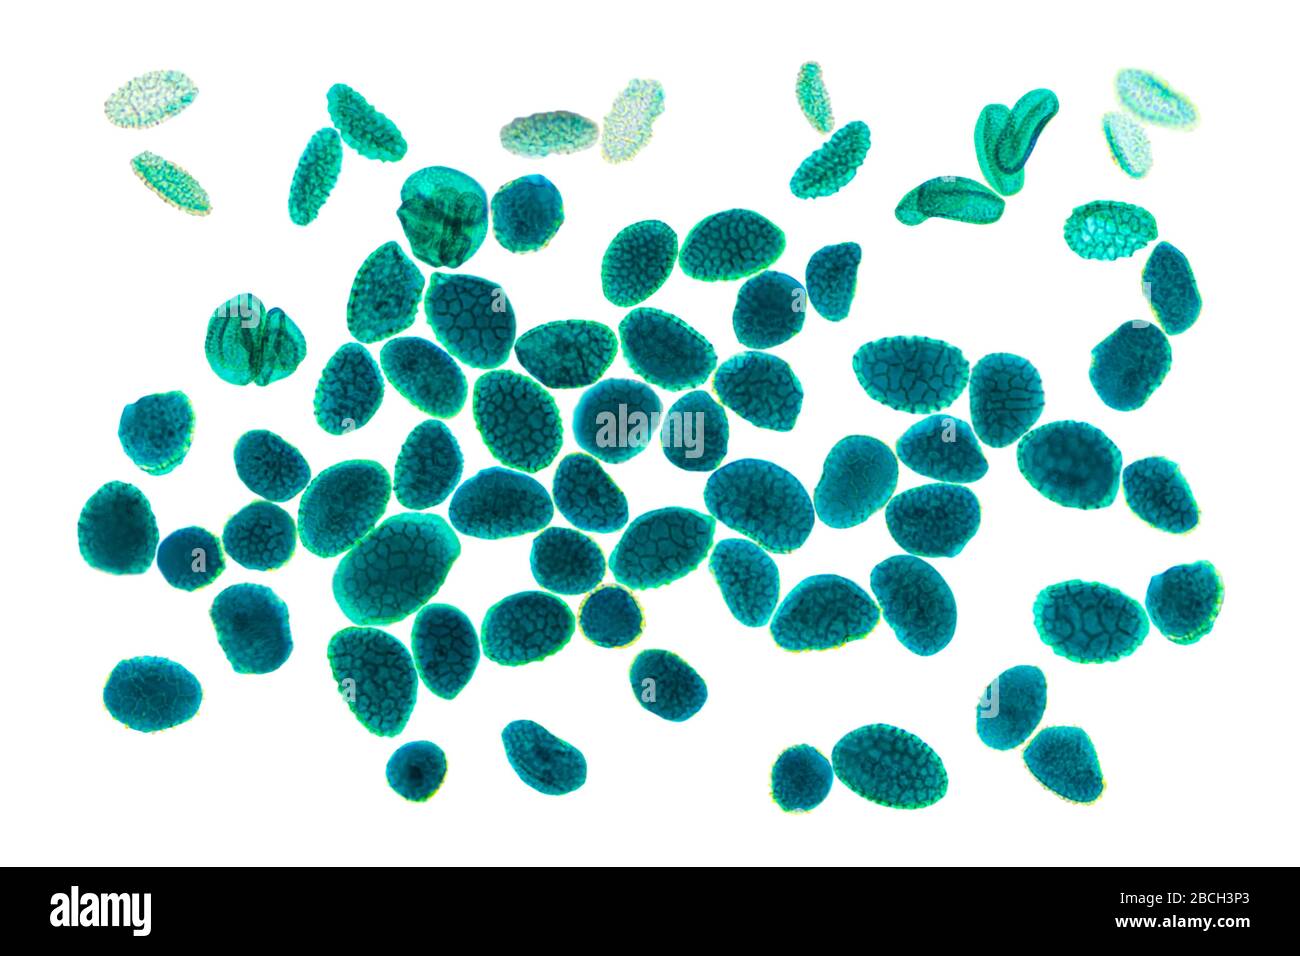 Magnified pollen grains under the light microscope. Grains of pollen often cause allergic reactions to the antigens. Stock Photo